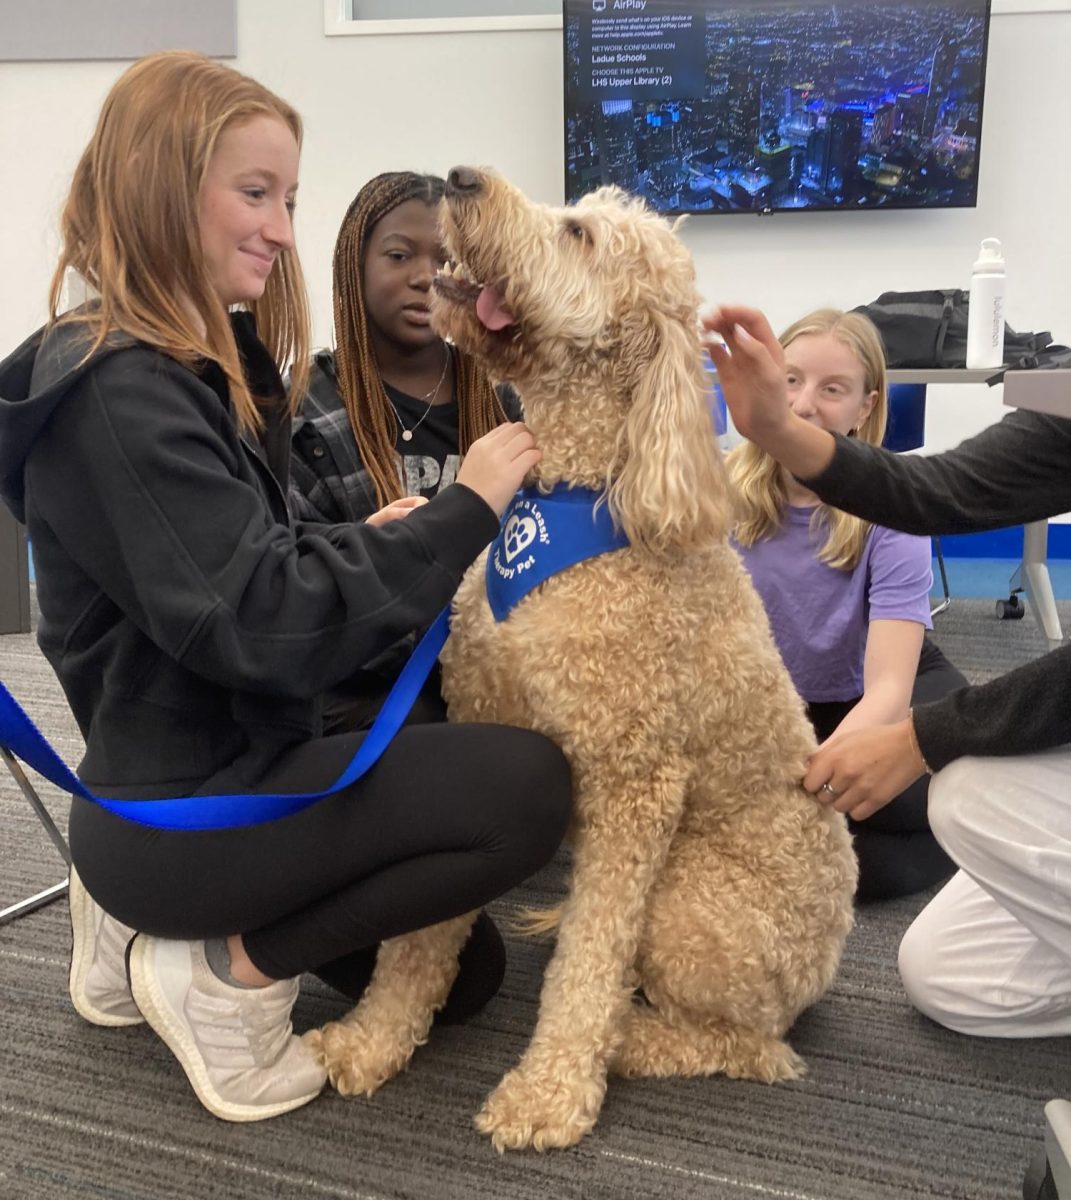 Allie+Glidewell+%2810%29+pets+Jax%2C+a+goldendoodle%2C+during+his+visit+Sept.+7.+He+was+in+therapy+dog+training+for+two+years+and+still+attends+weekly+classes+to+practice+his+skills.+%E2%80%9CWe+thought+that+%5Btherapy+dogs%5D+sounded+like+a+really+cool+opportunity+that+students+would+enjoy%2C%E2%80%9D+librarian+Jennifer+Tuttle+said.